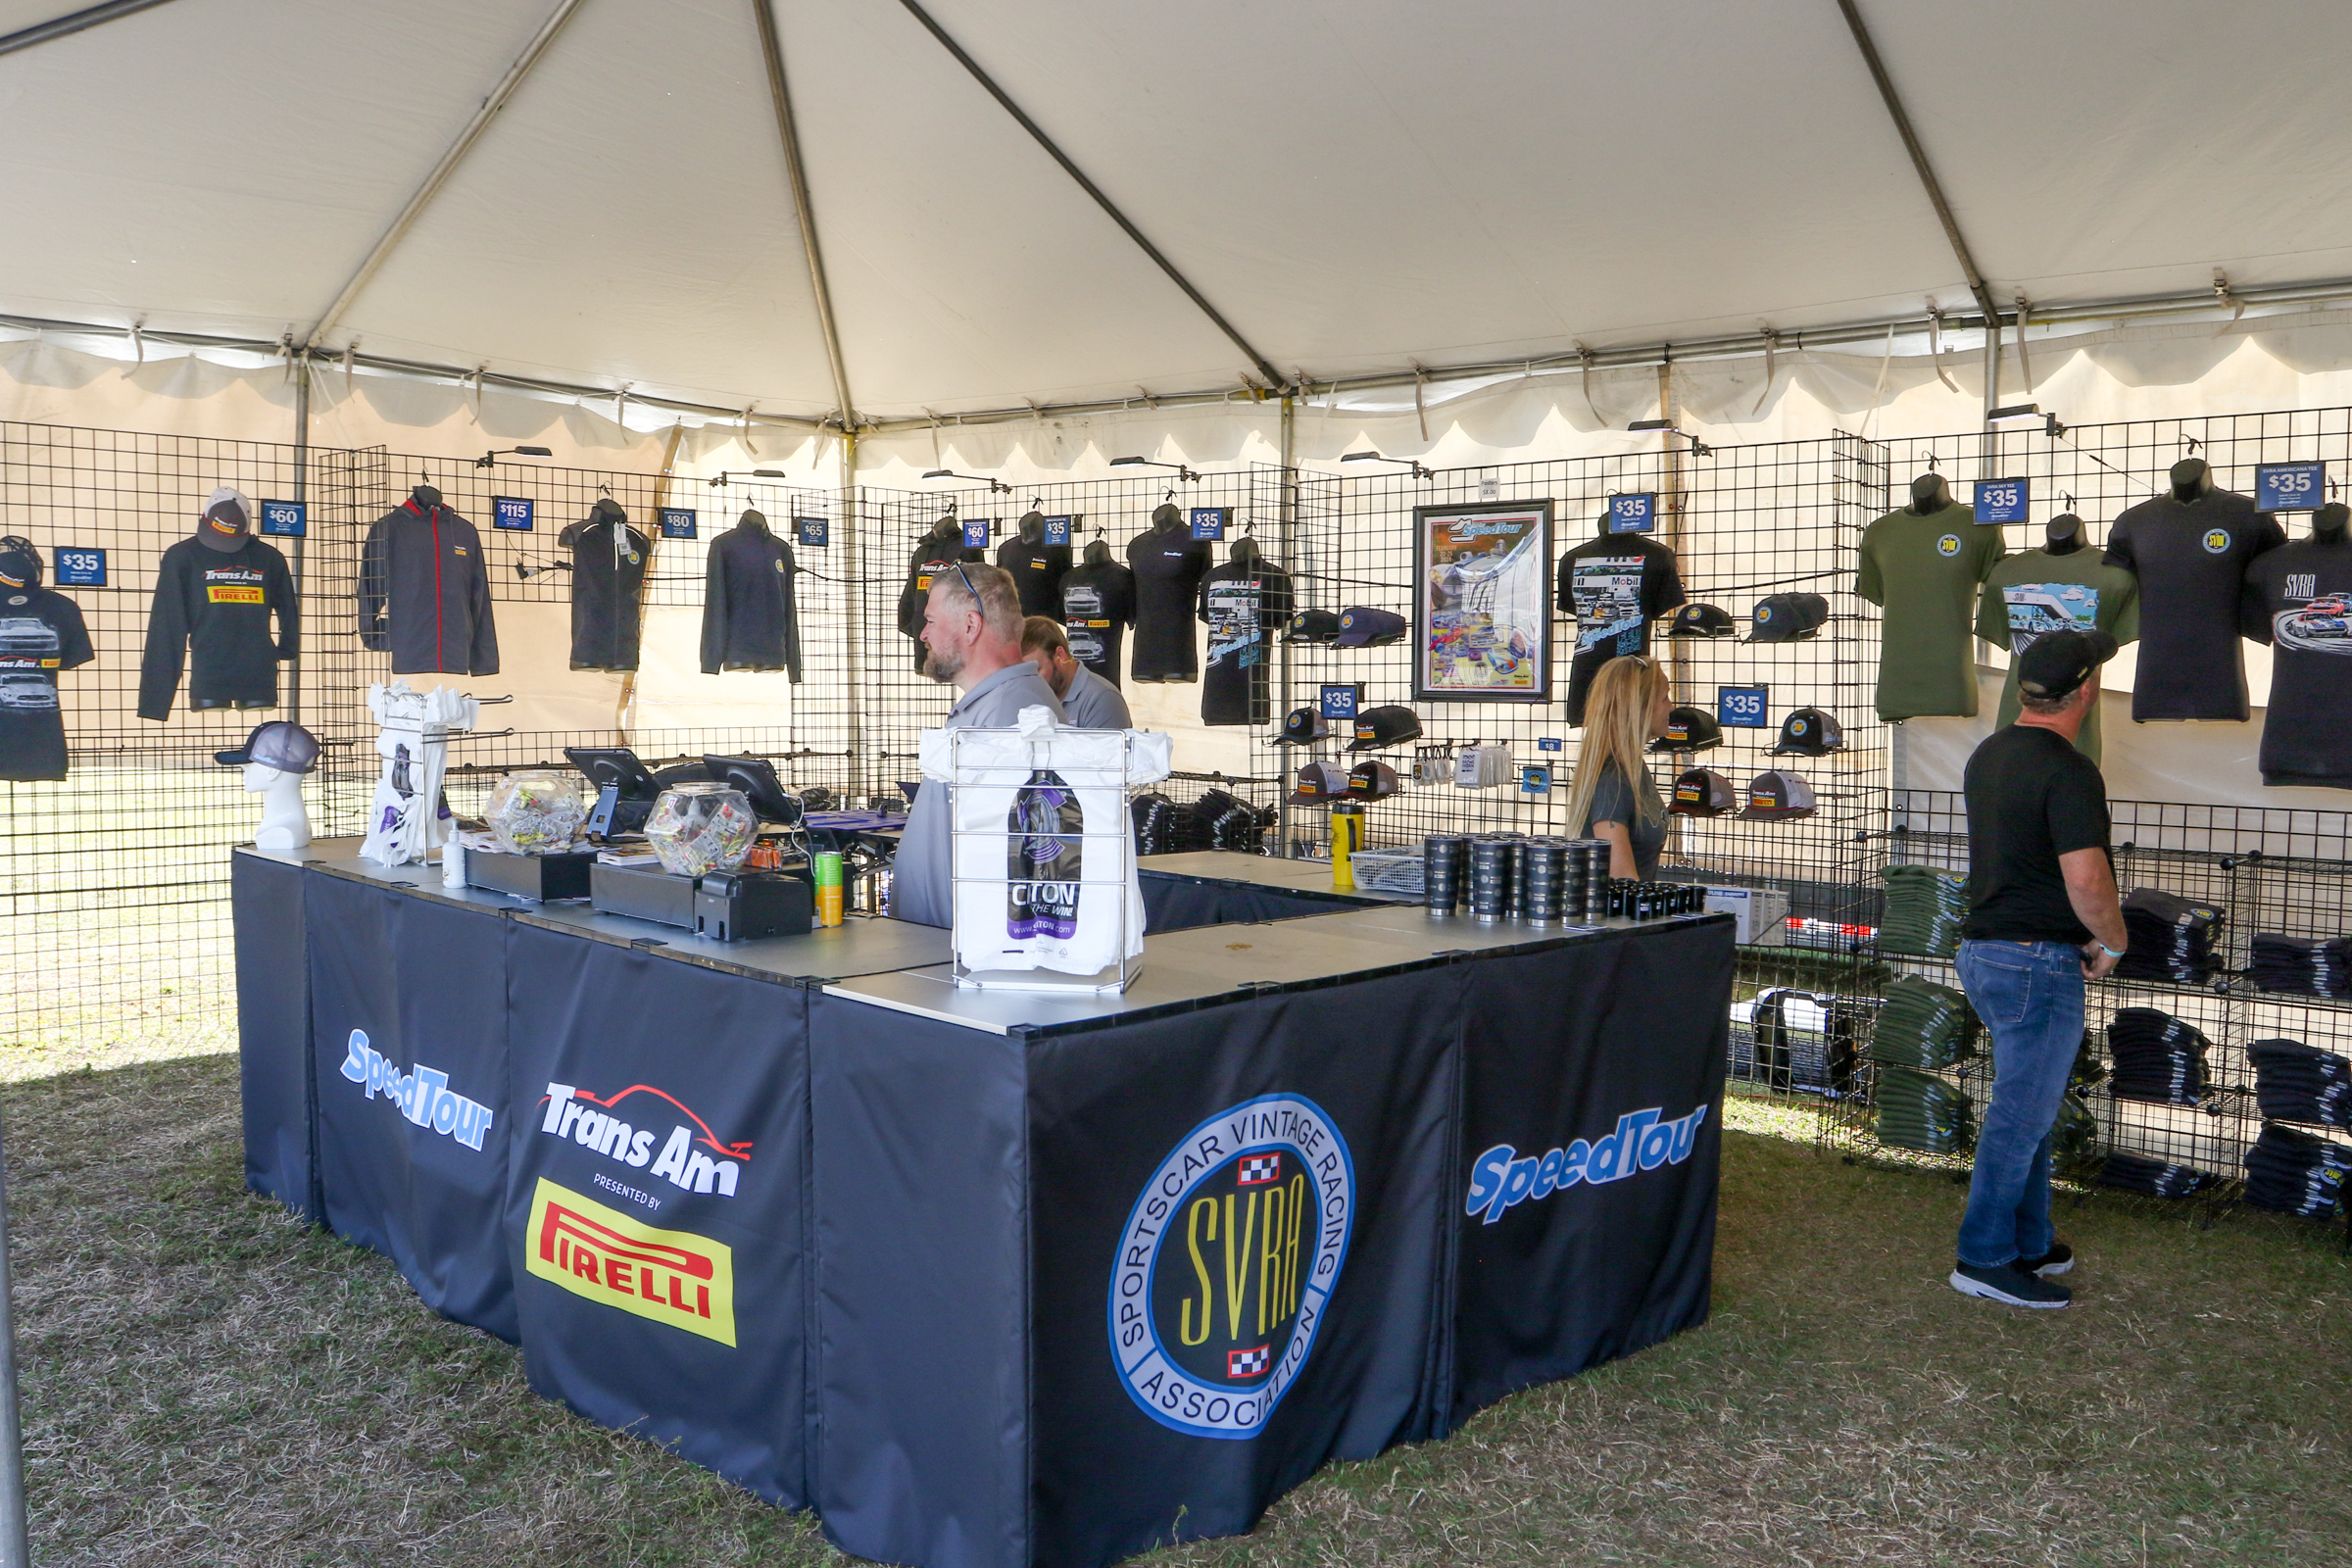 PMH and Craton Promotions Enter Long-Term Partnership For Merchandise, Fan Experience Locations During SpeedTour Events